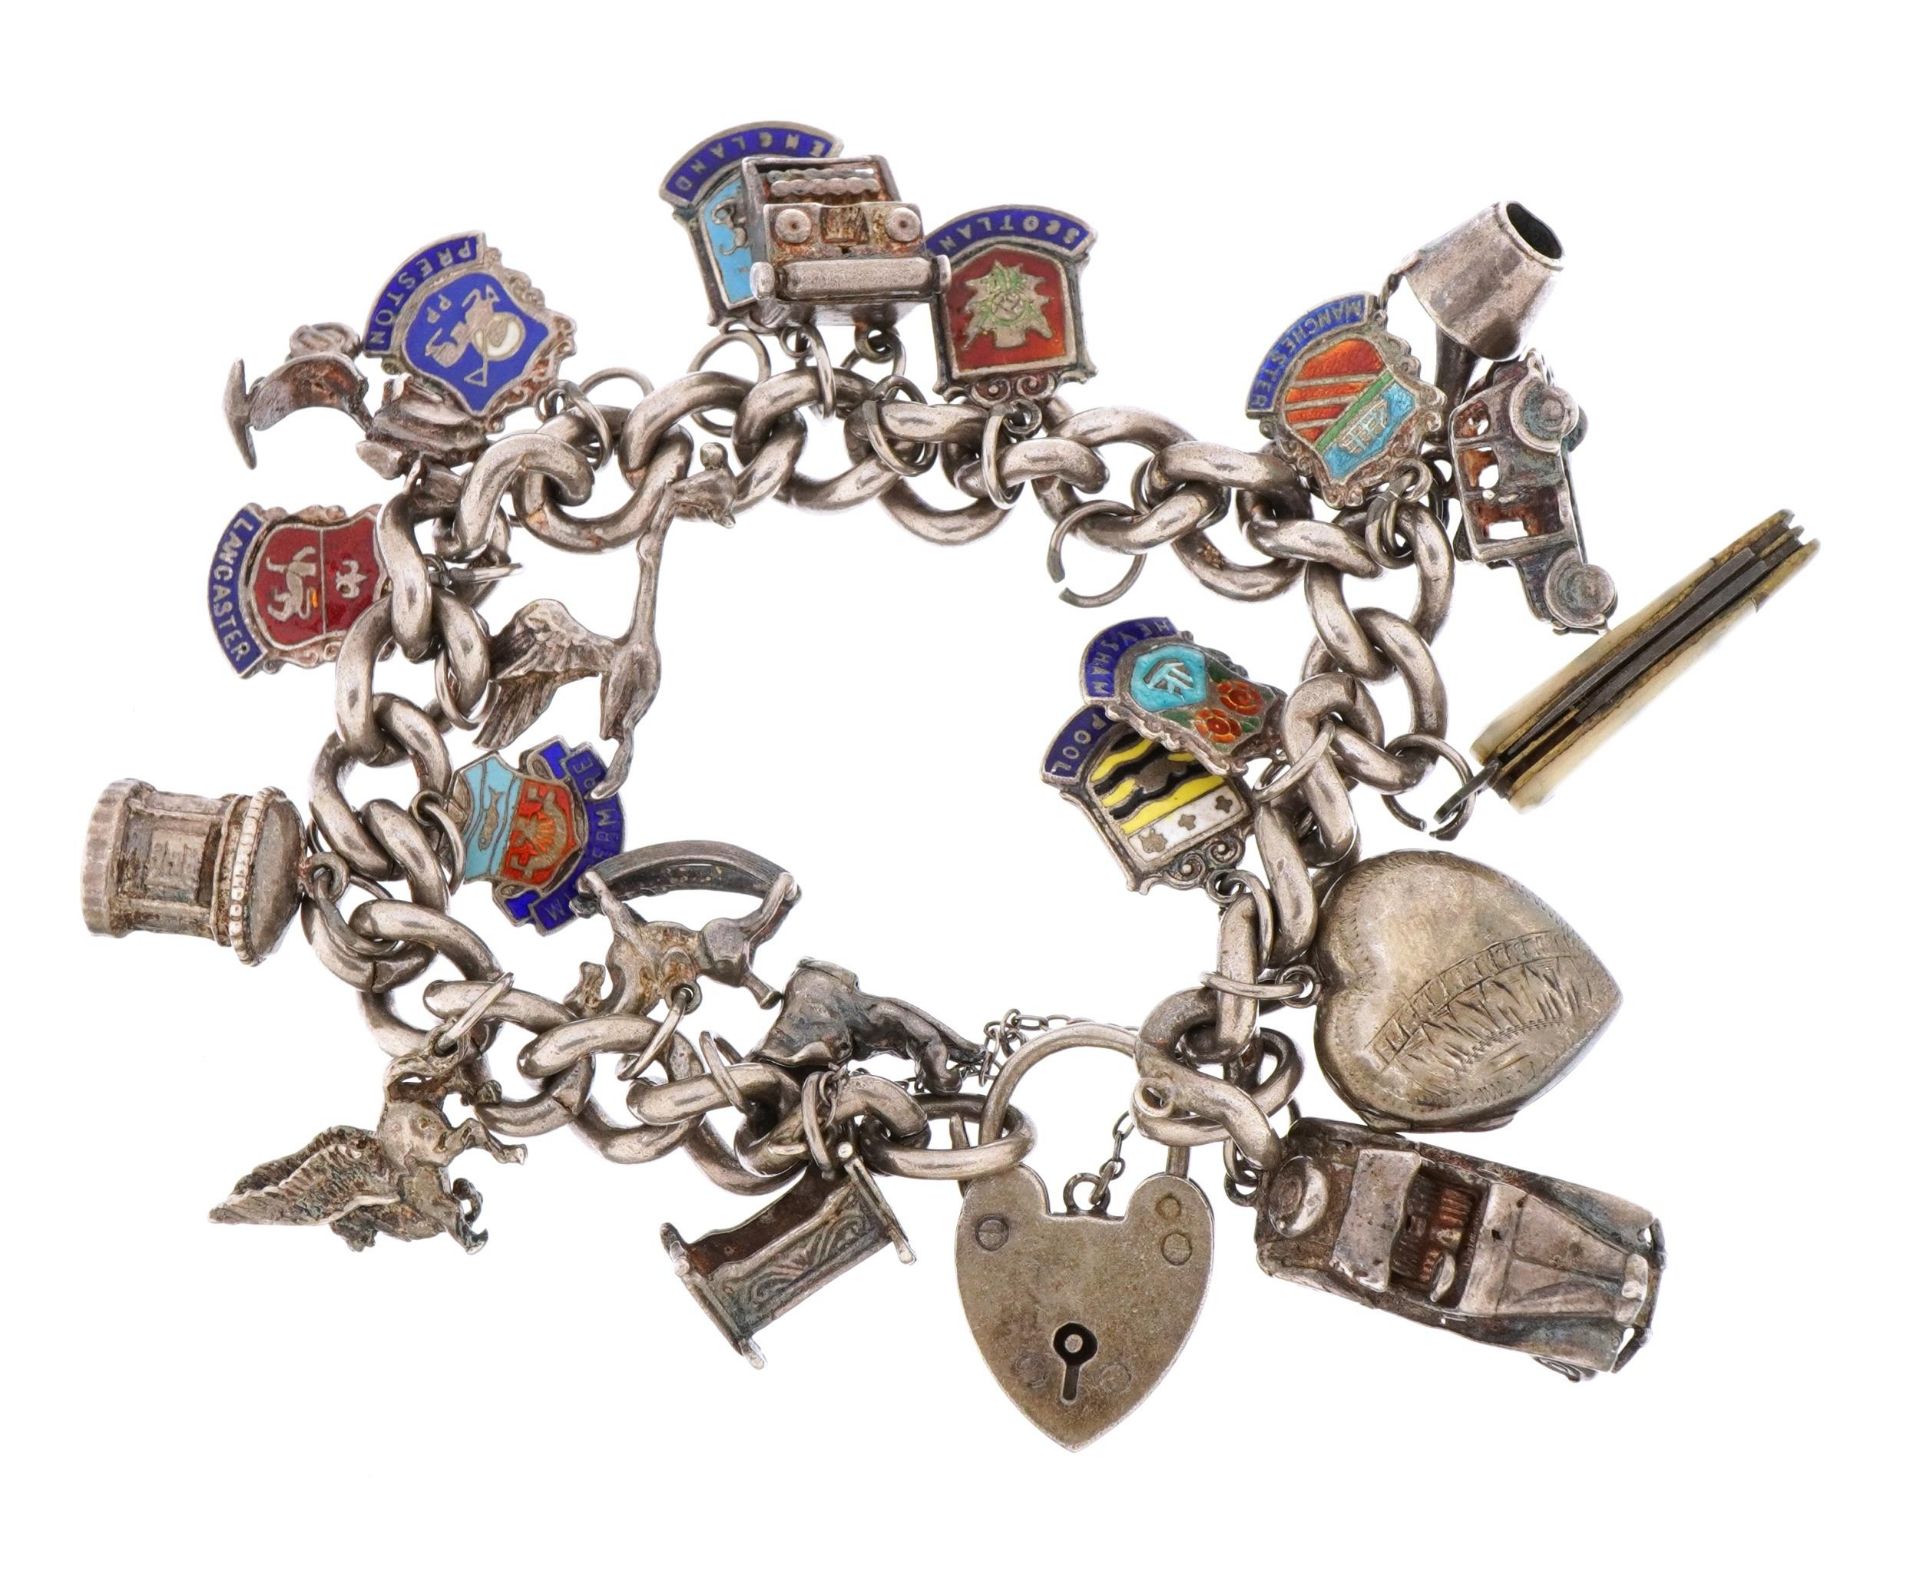 Silver charm bracelet with a selection of mostly silver and some enamel charms including opening